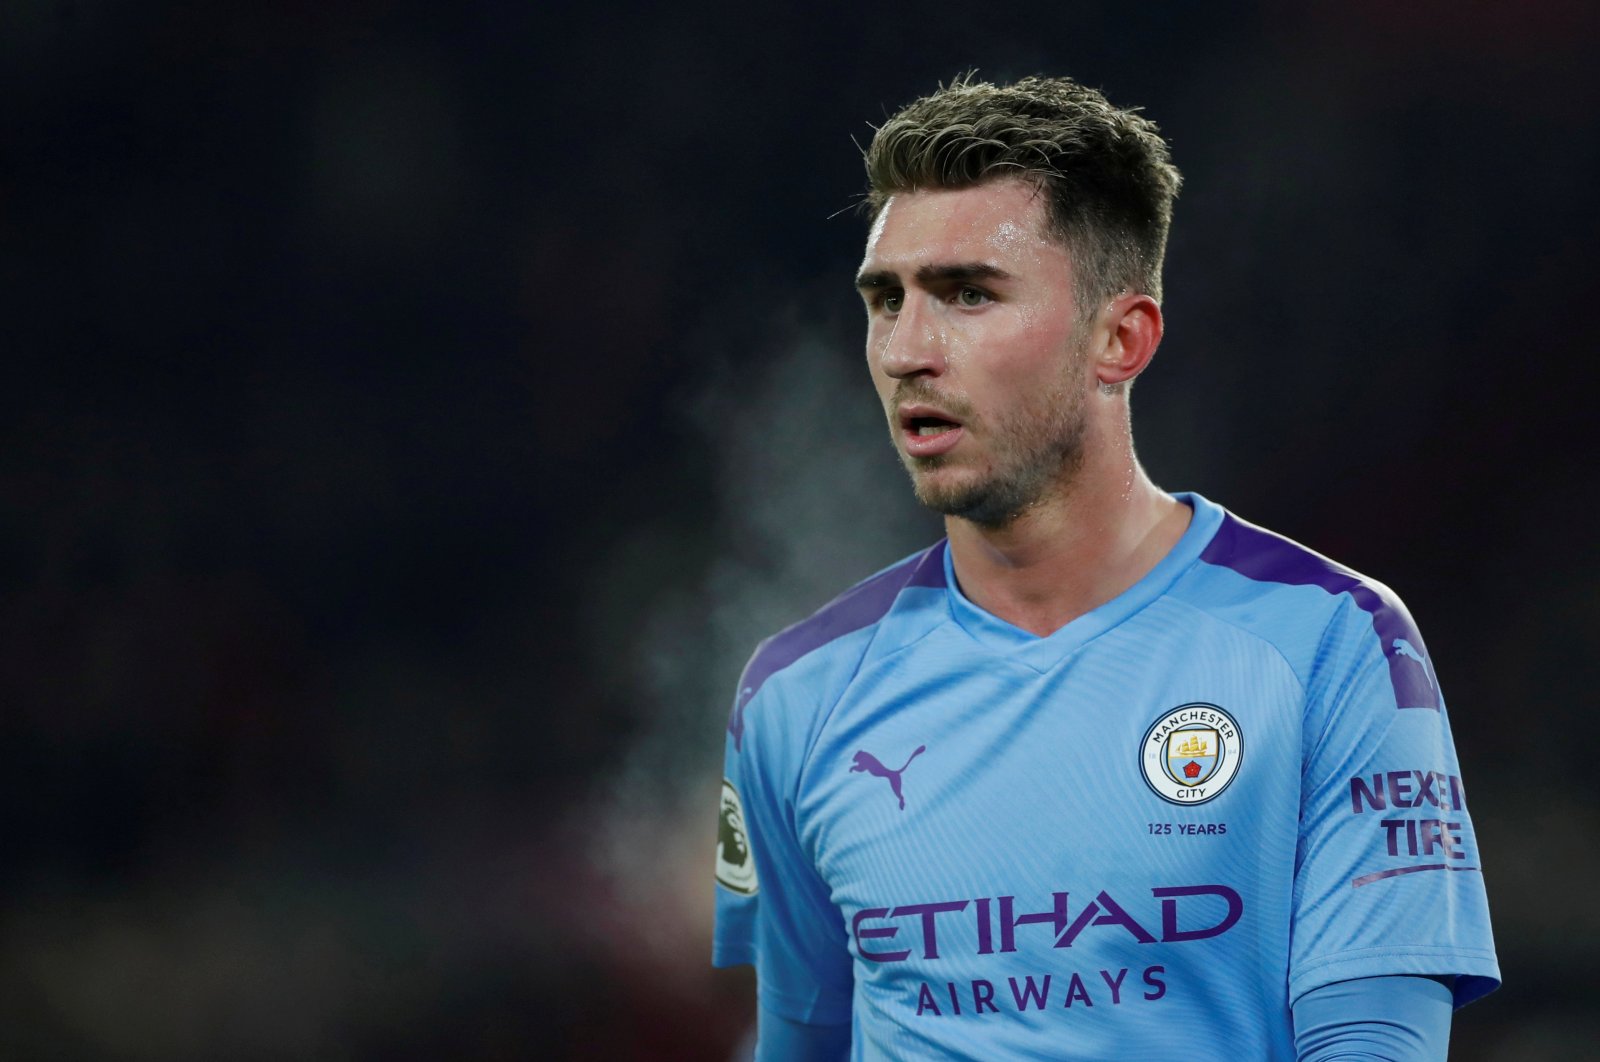 Manchester City's Aymeric Laporte during a Premier League Match against Sheffield United in Sheffield, Britain, Jan. 21, 2020. (Reuters Photo)
